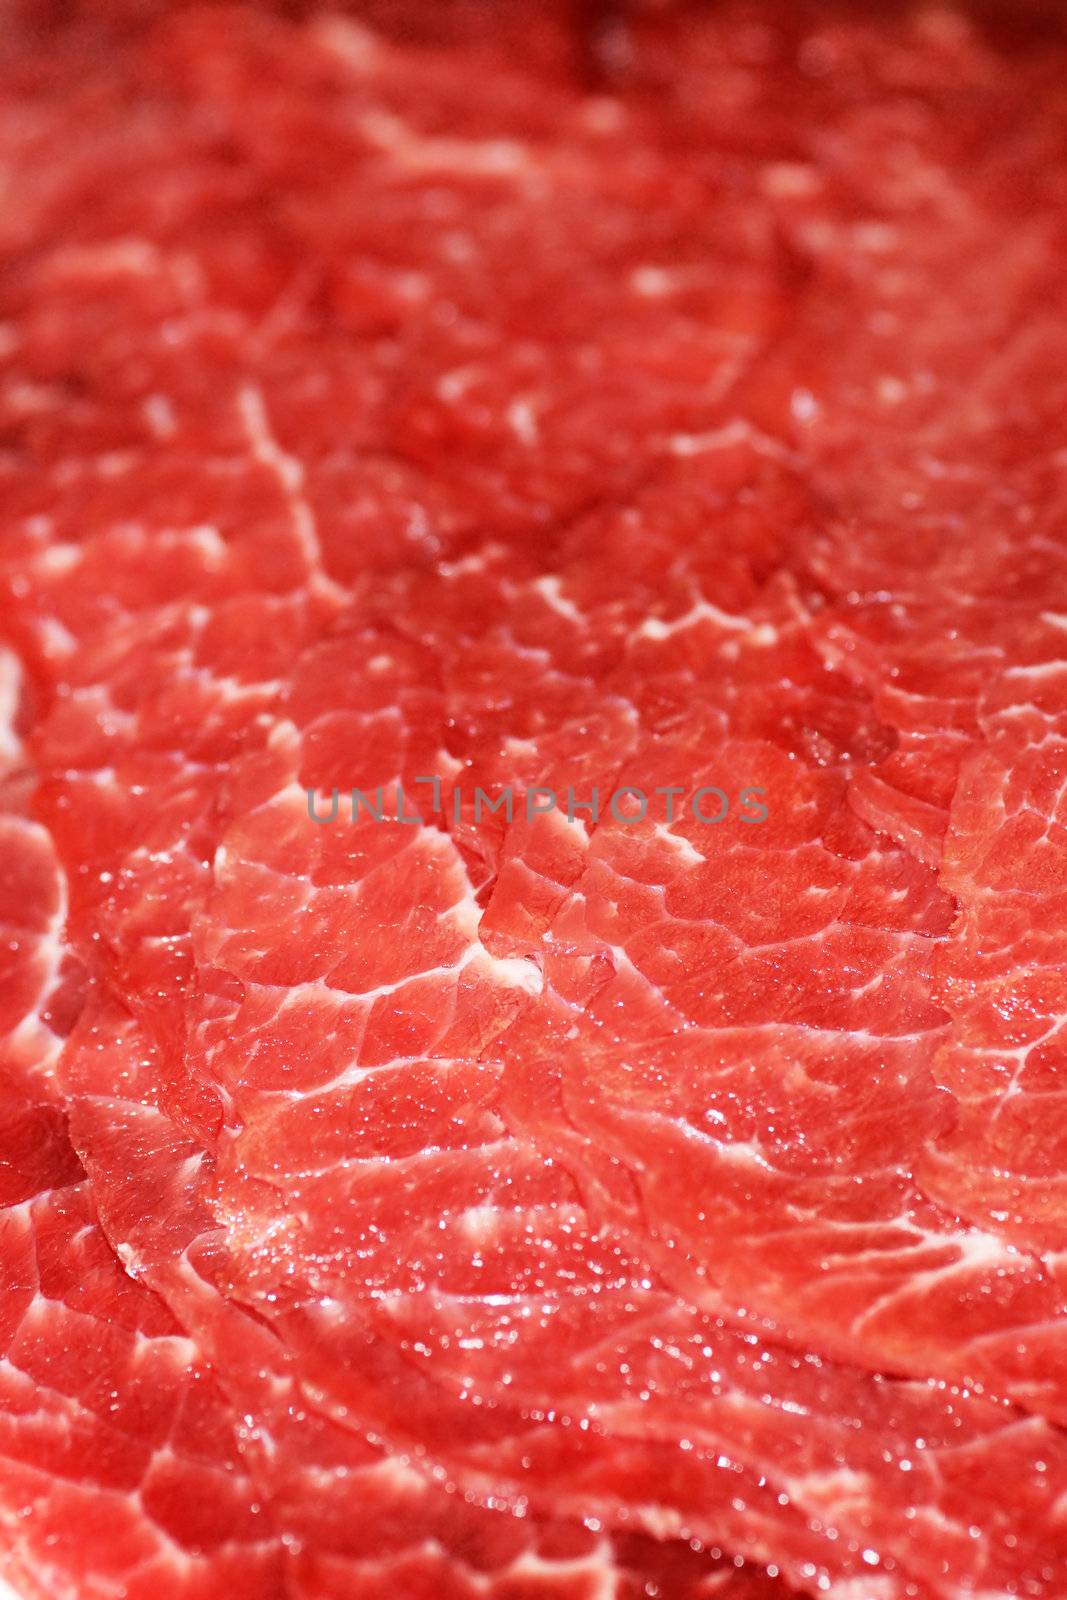 Details of uncooked red meat vertical